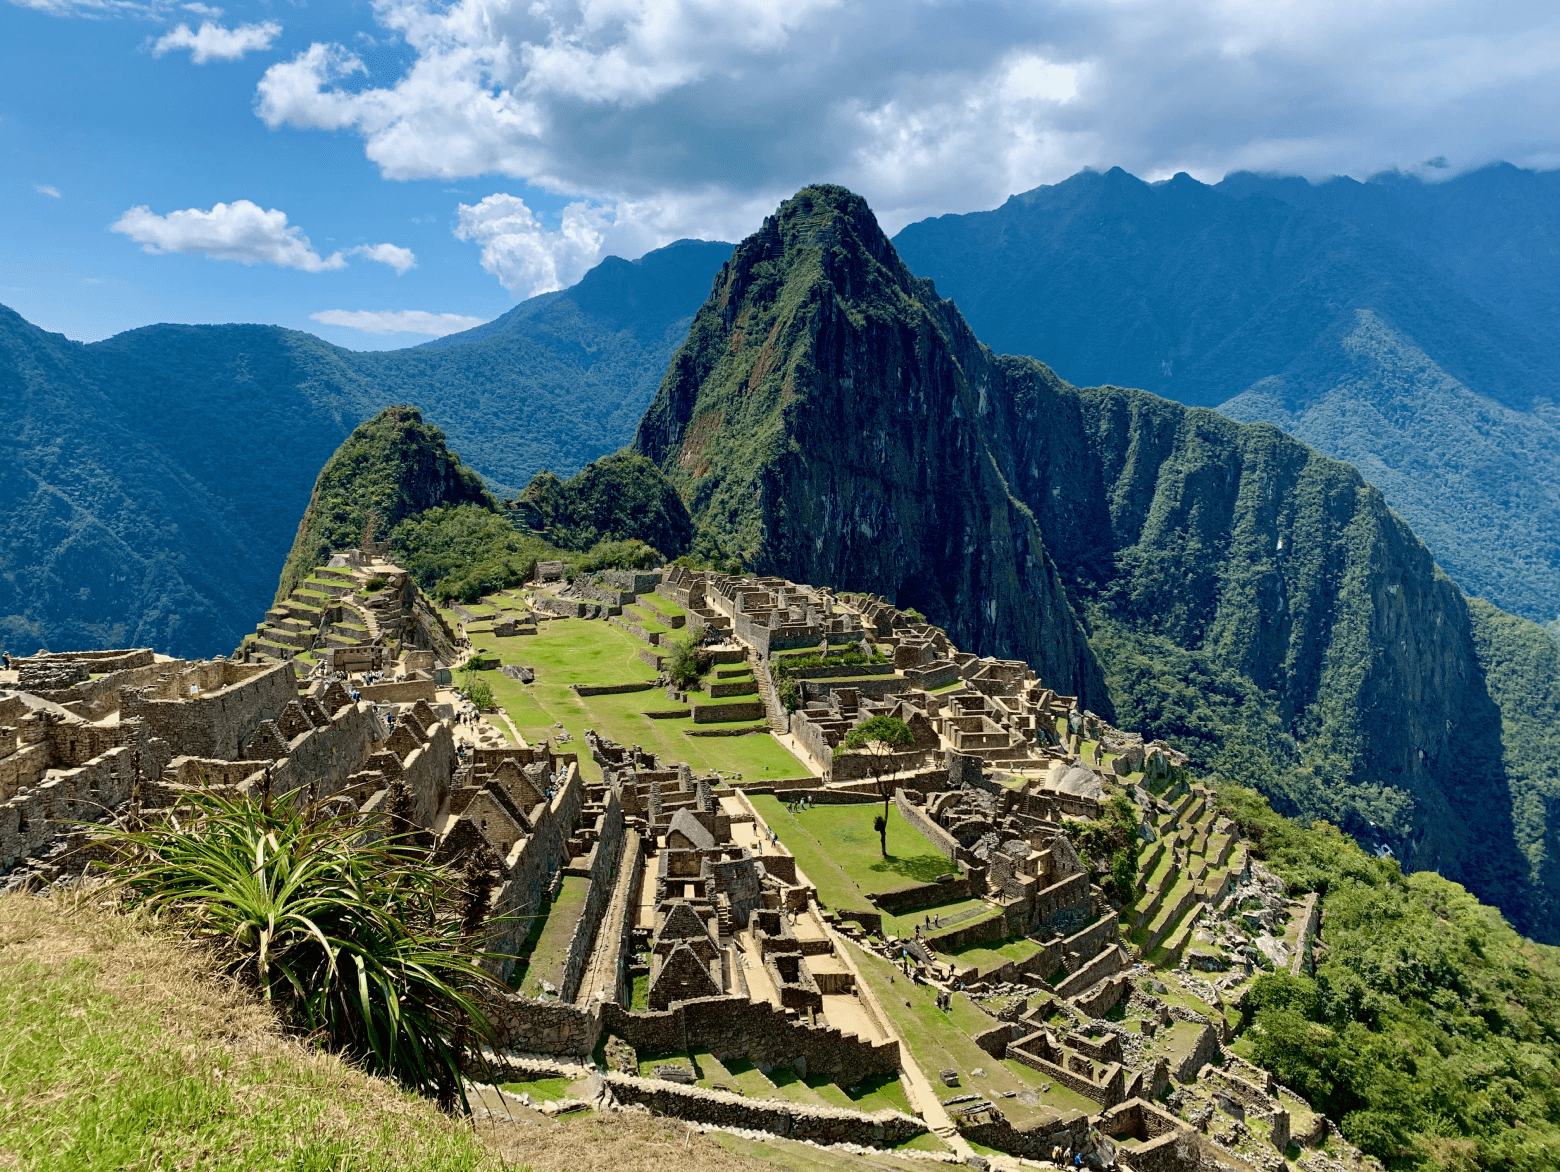 Machu Picchu’s popularity has sustained a culture